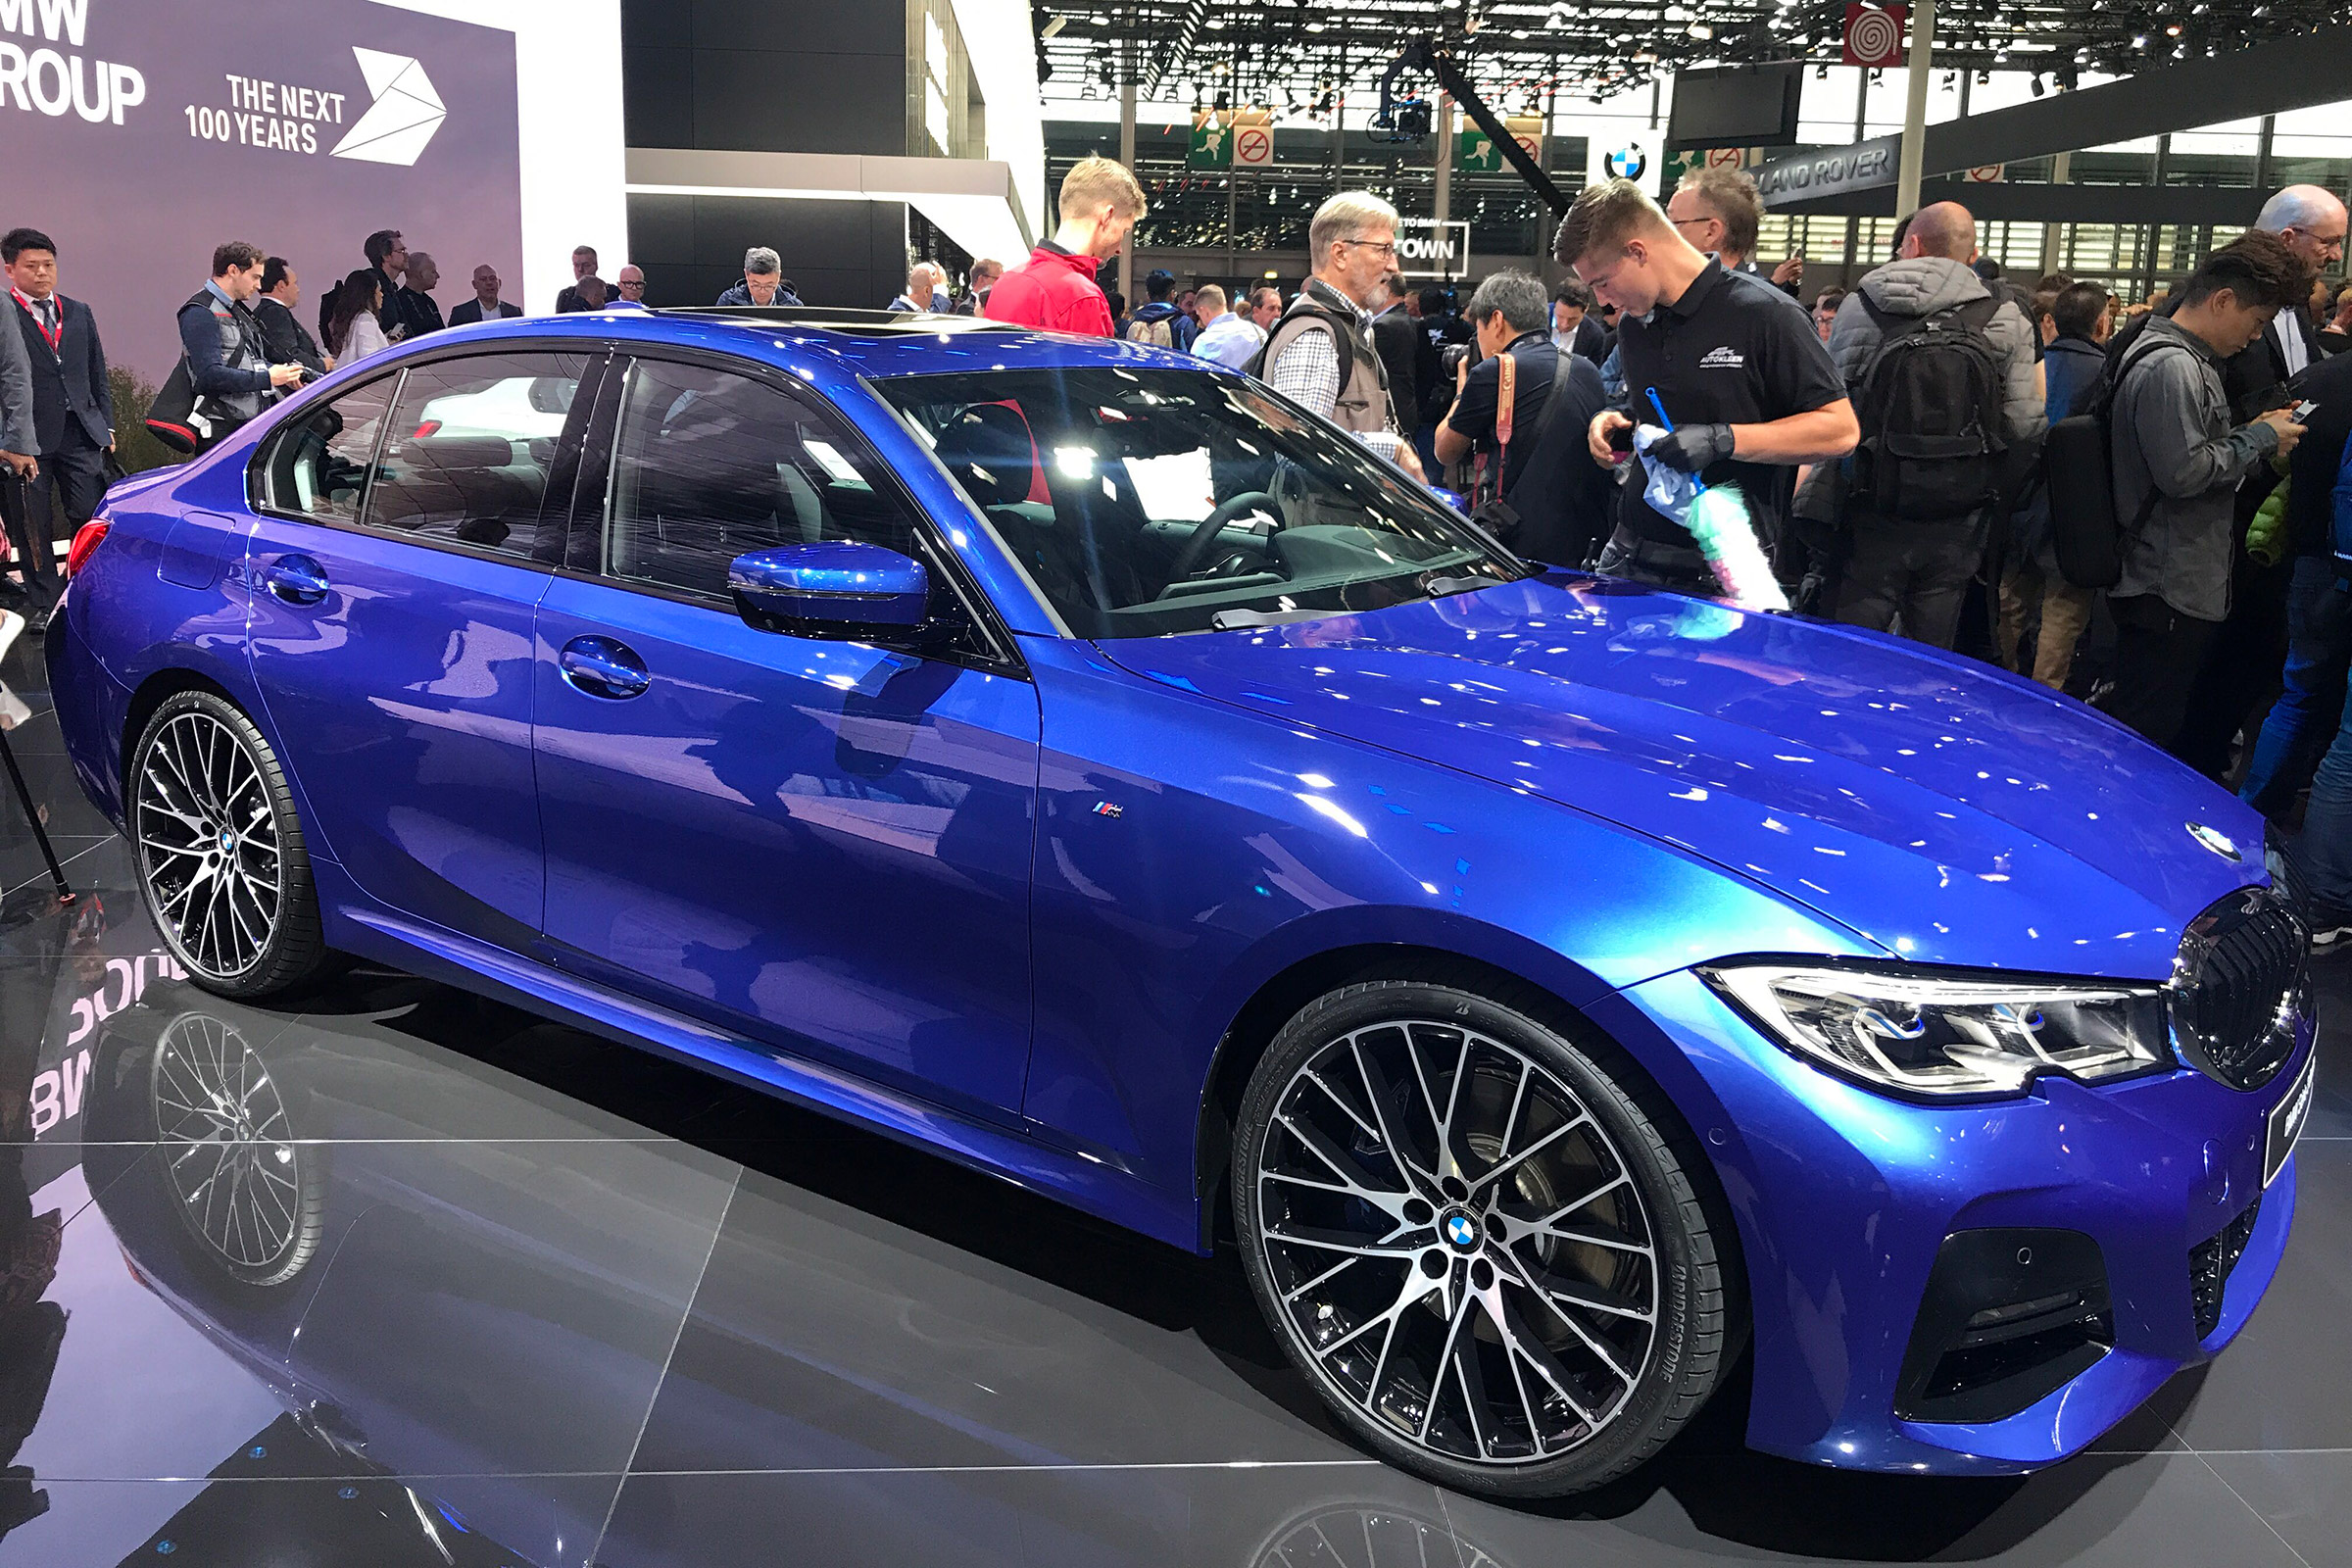 New 2019 Bmw 3 Series Revealed Lighter And More Dynamic Sports Saloon Evo